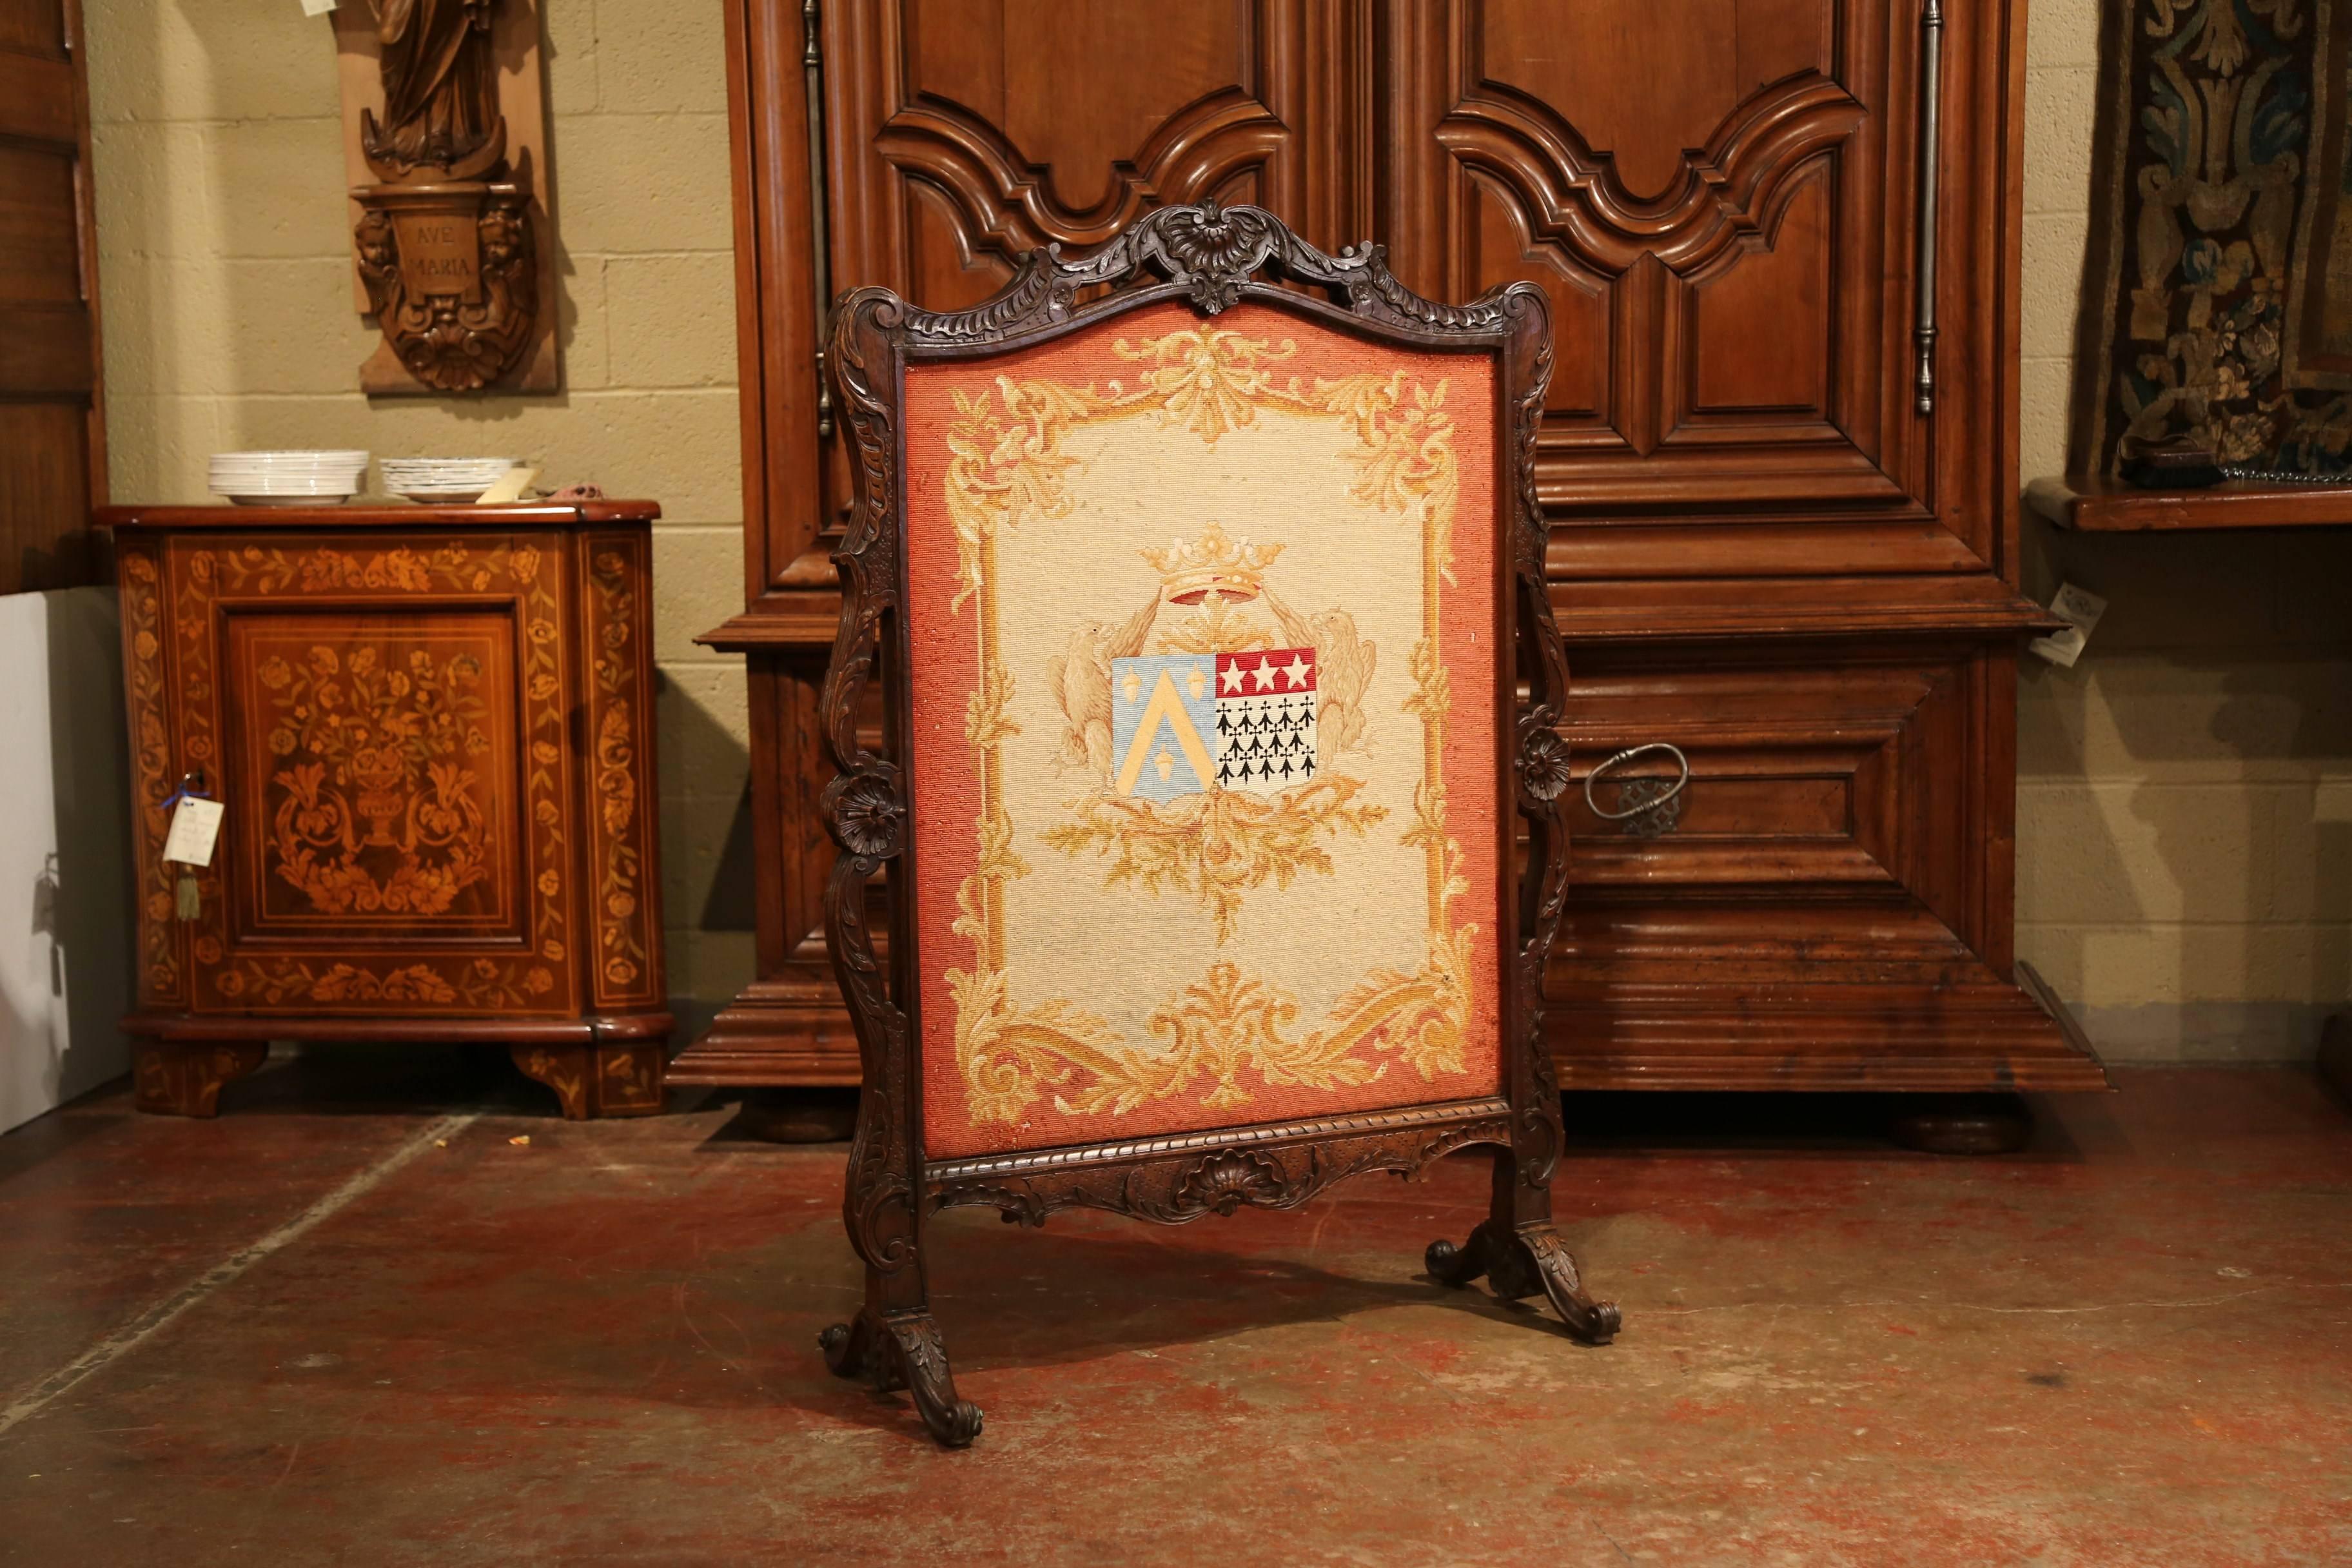 Place this elegant and colorful antique screen in front of your mantel! Created in France, circa 1870, the freestanding piece has a removable handwoven tapestry featuring a family coat of arms with crown and crest flanked by birds on each side. The